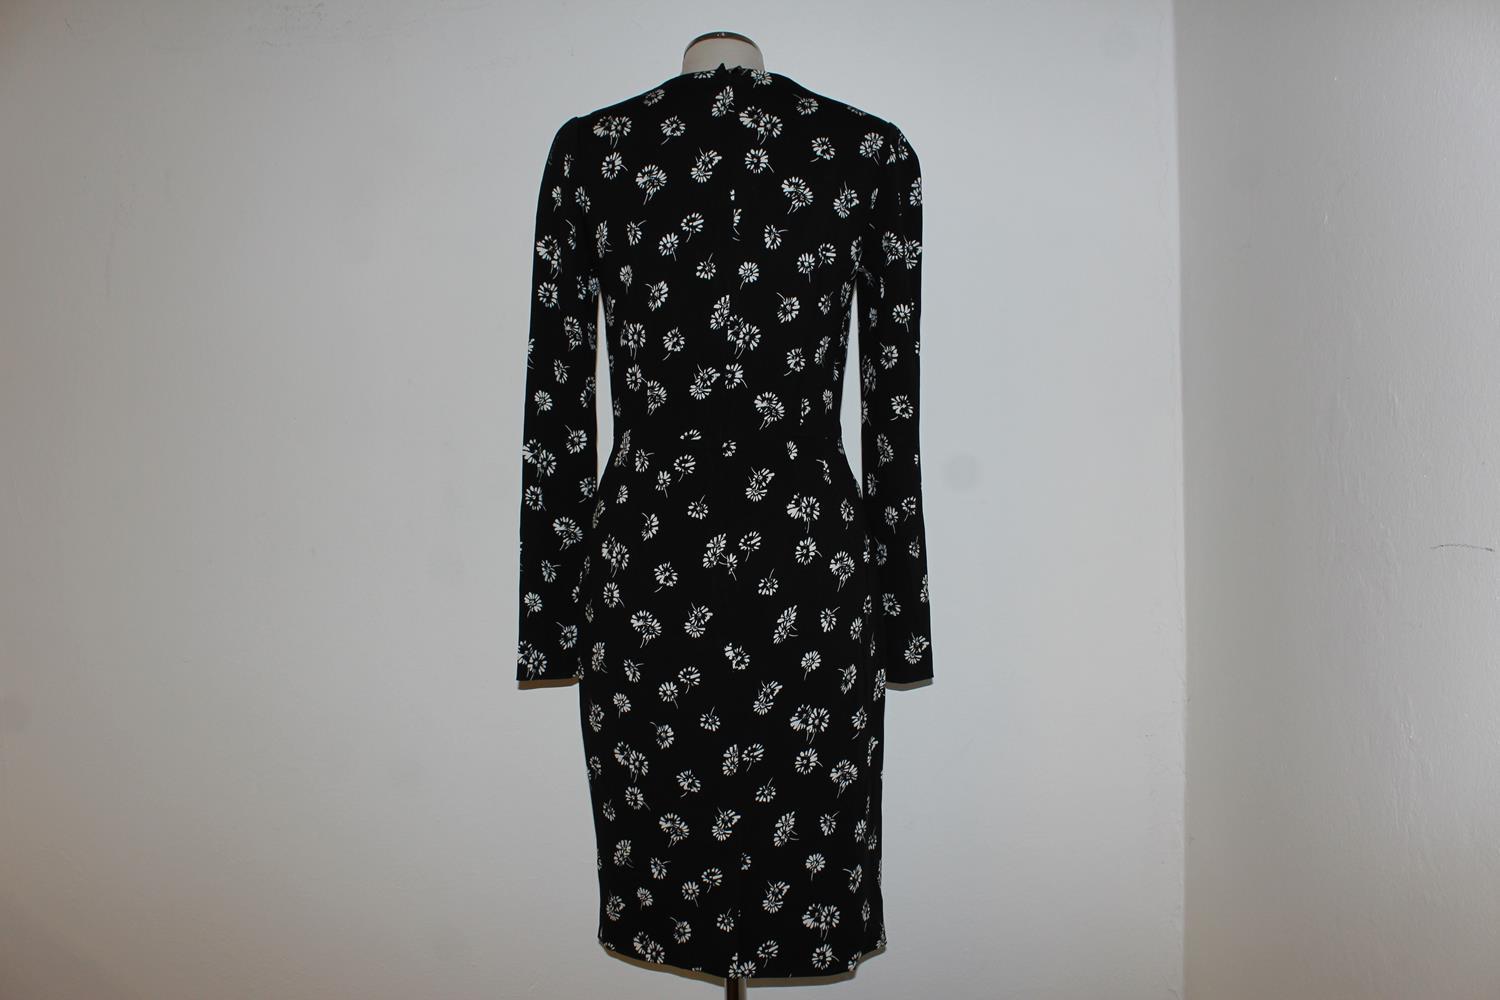 Beautiful Dolce&Gabbana cocktail dress
Black color with little white flowers print
Long sleeves
Total length cm 98 (38.58 inches)
Shoulder cm 36 (14.17 inches)
Composition tag missing
Worldwide express shipping included in the price !